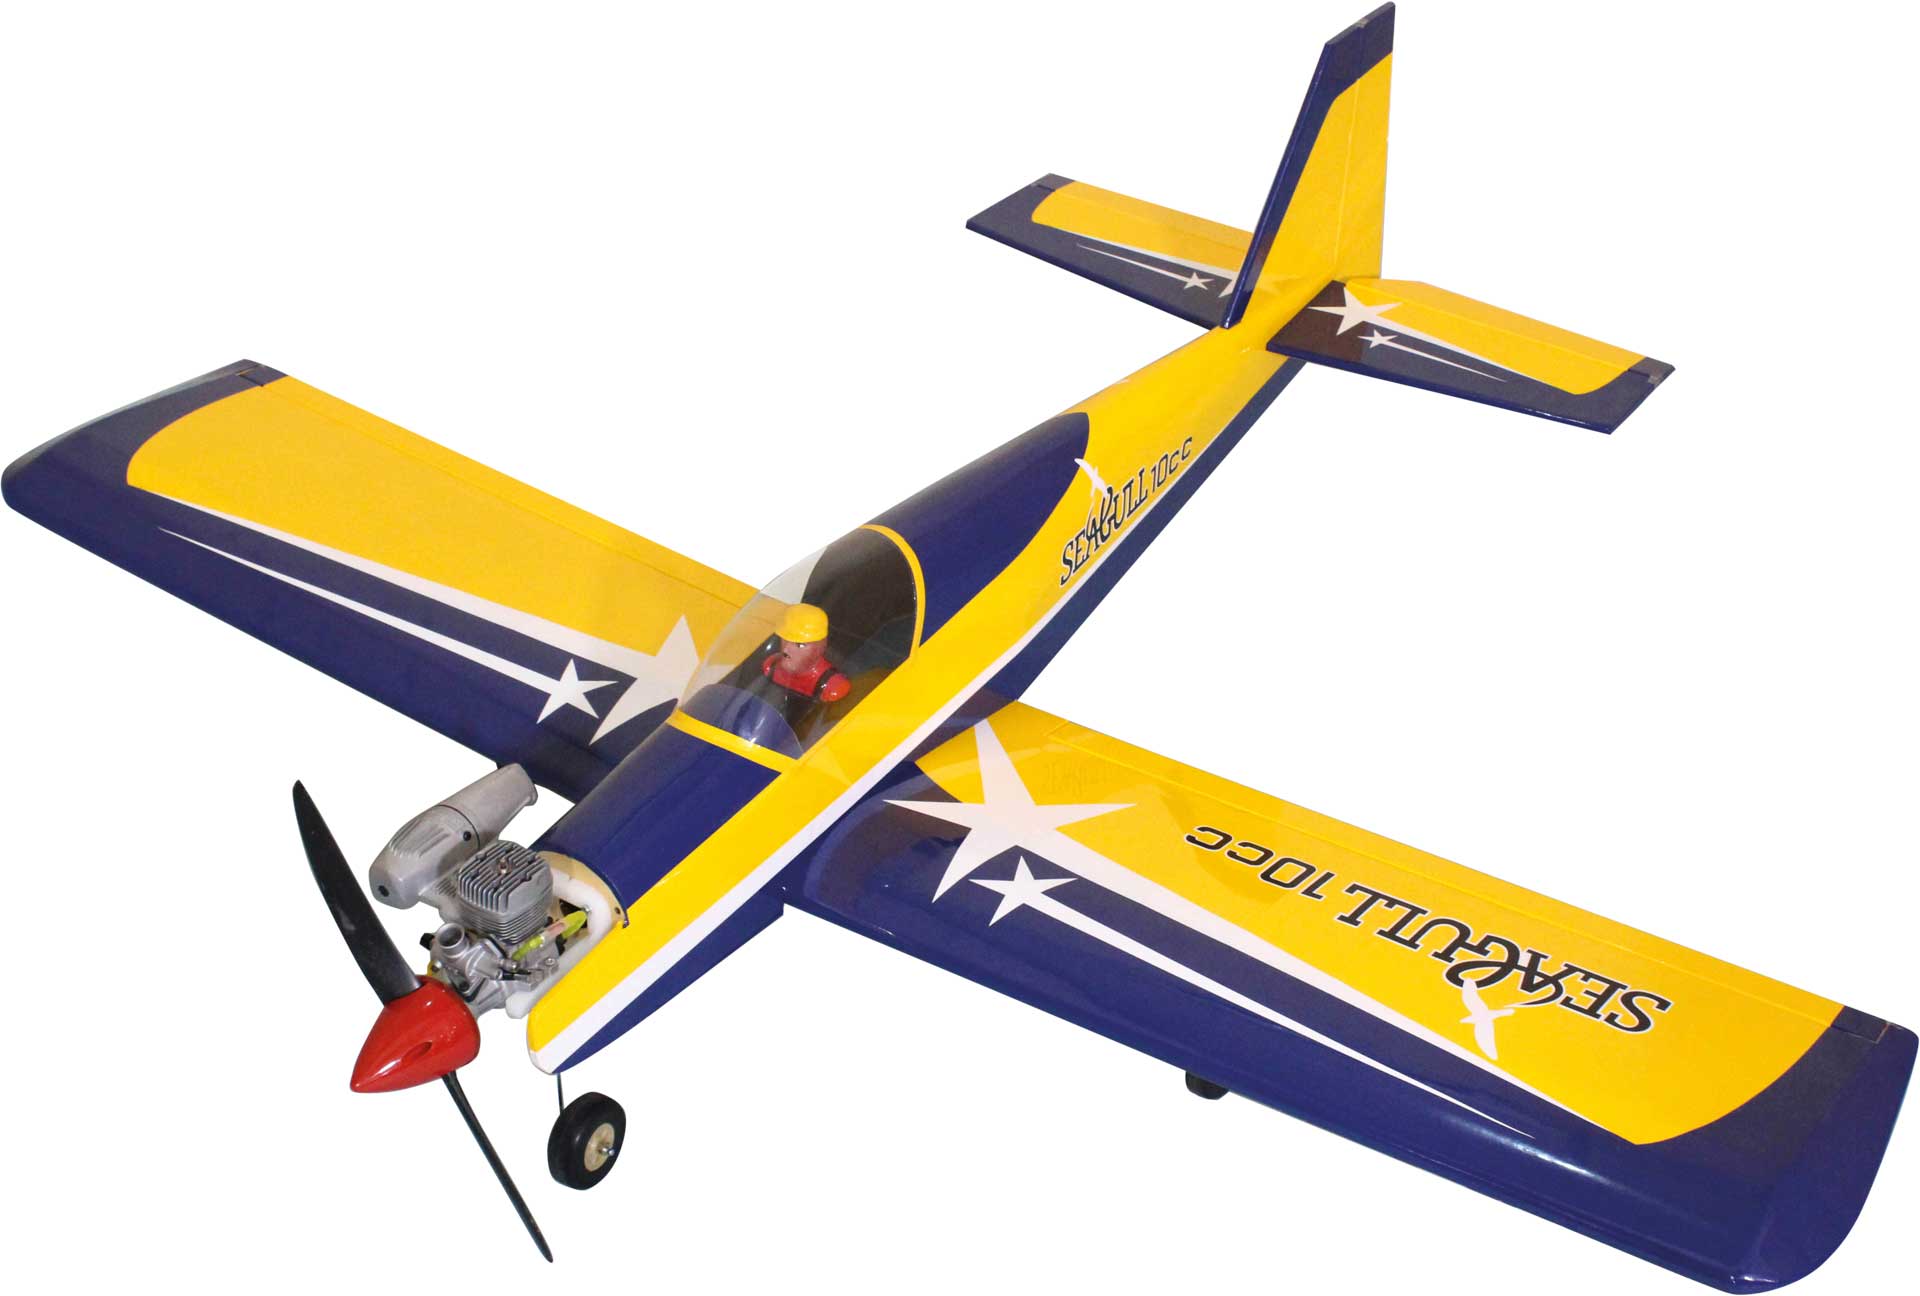 Seagull Models ( SG-Models ) Trainer 40 "Low Wing" ARF Low Wing